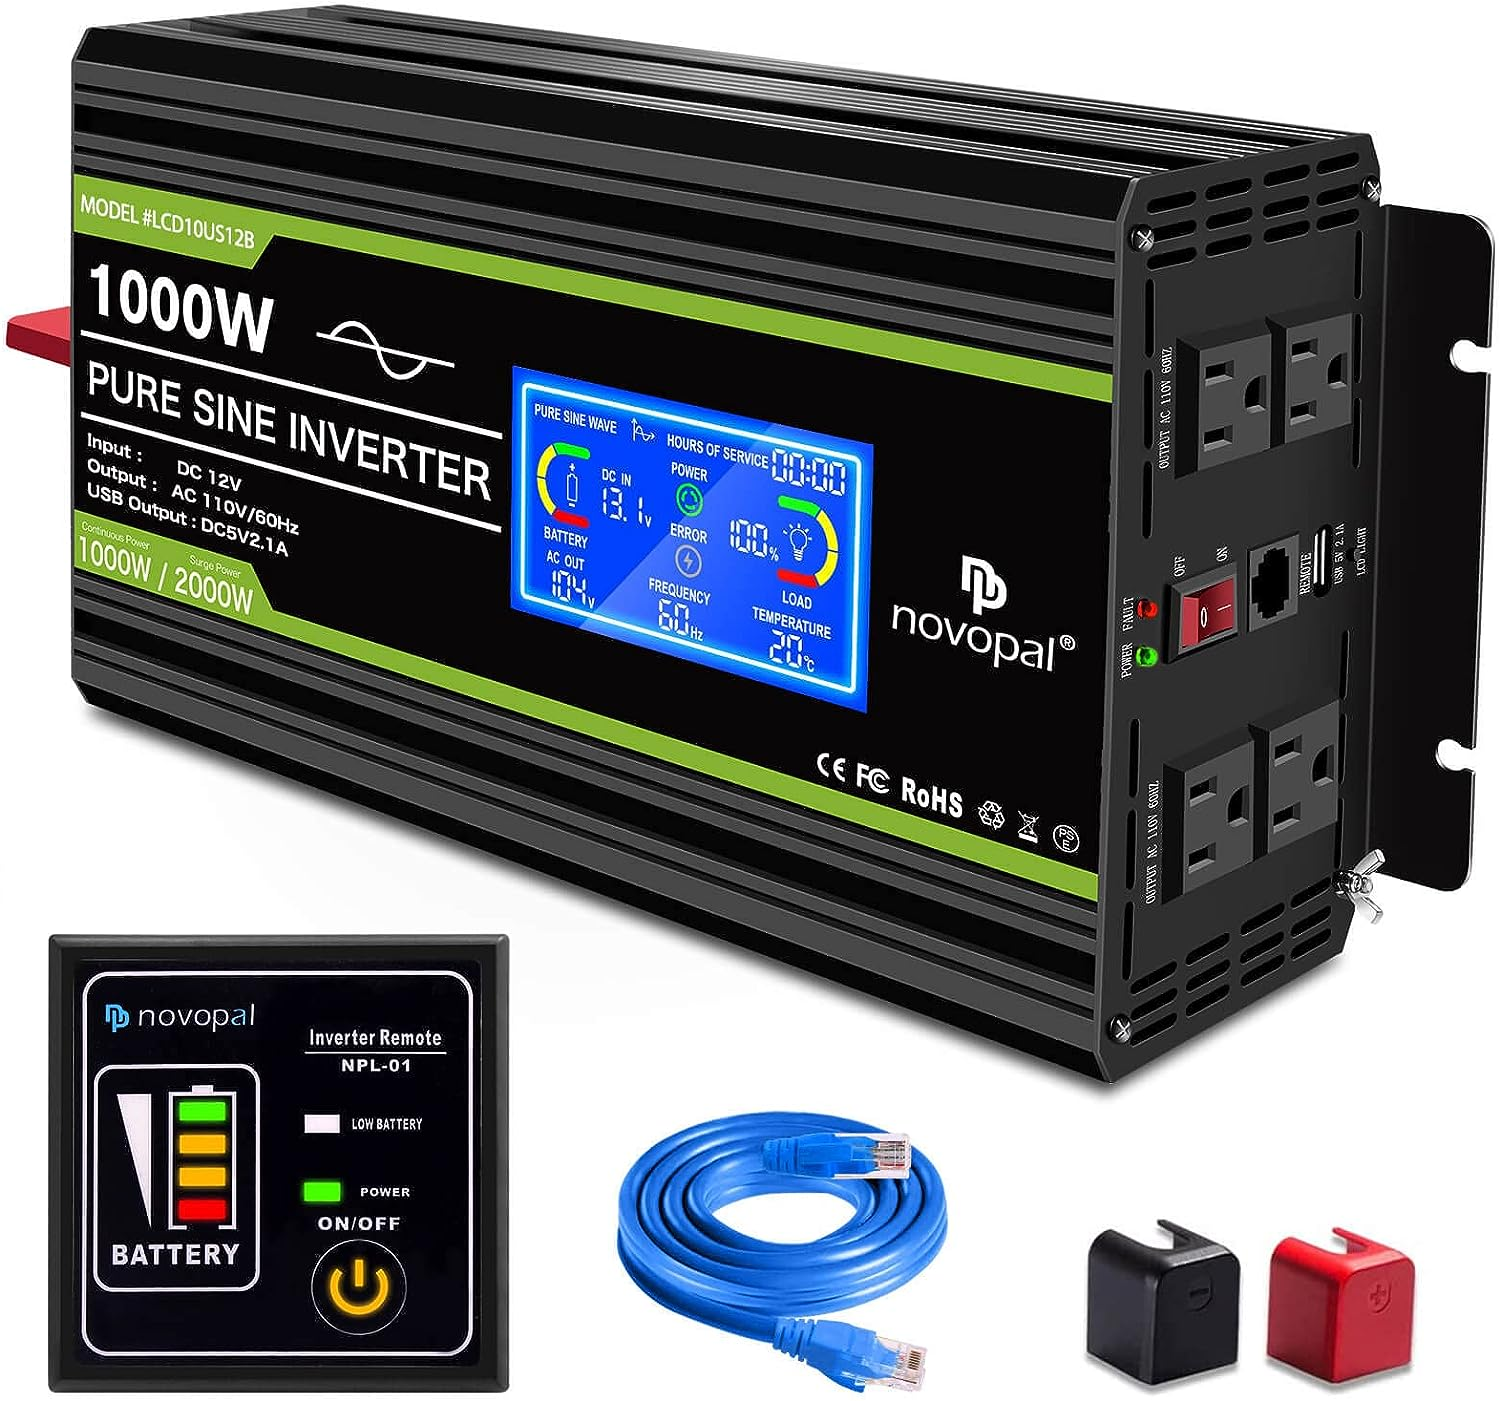 A 1000W pure sine wave inverter with LED indicators and LCD display